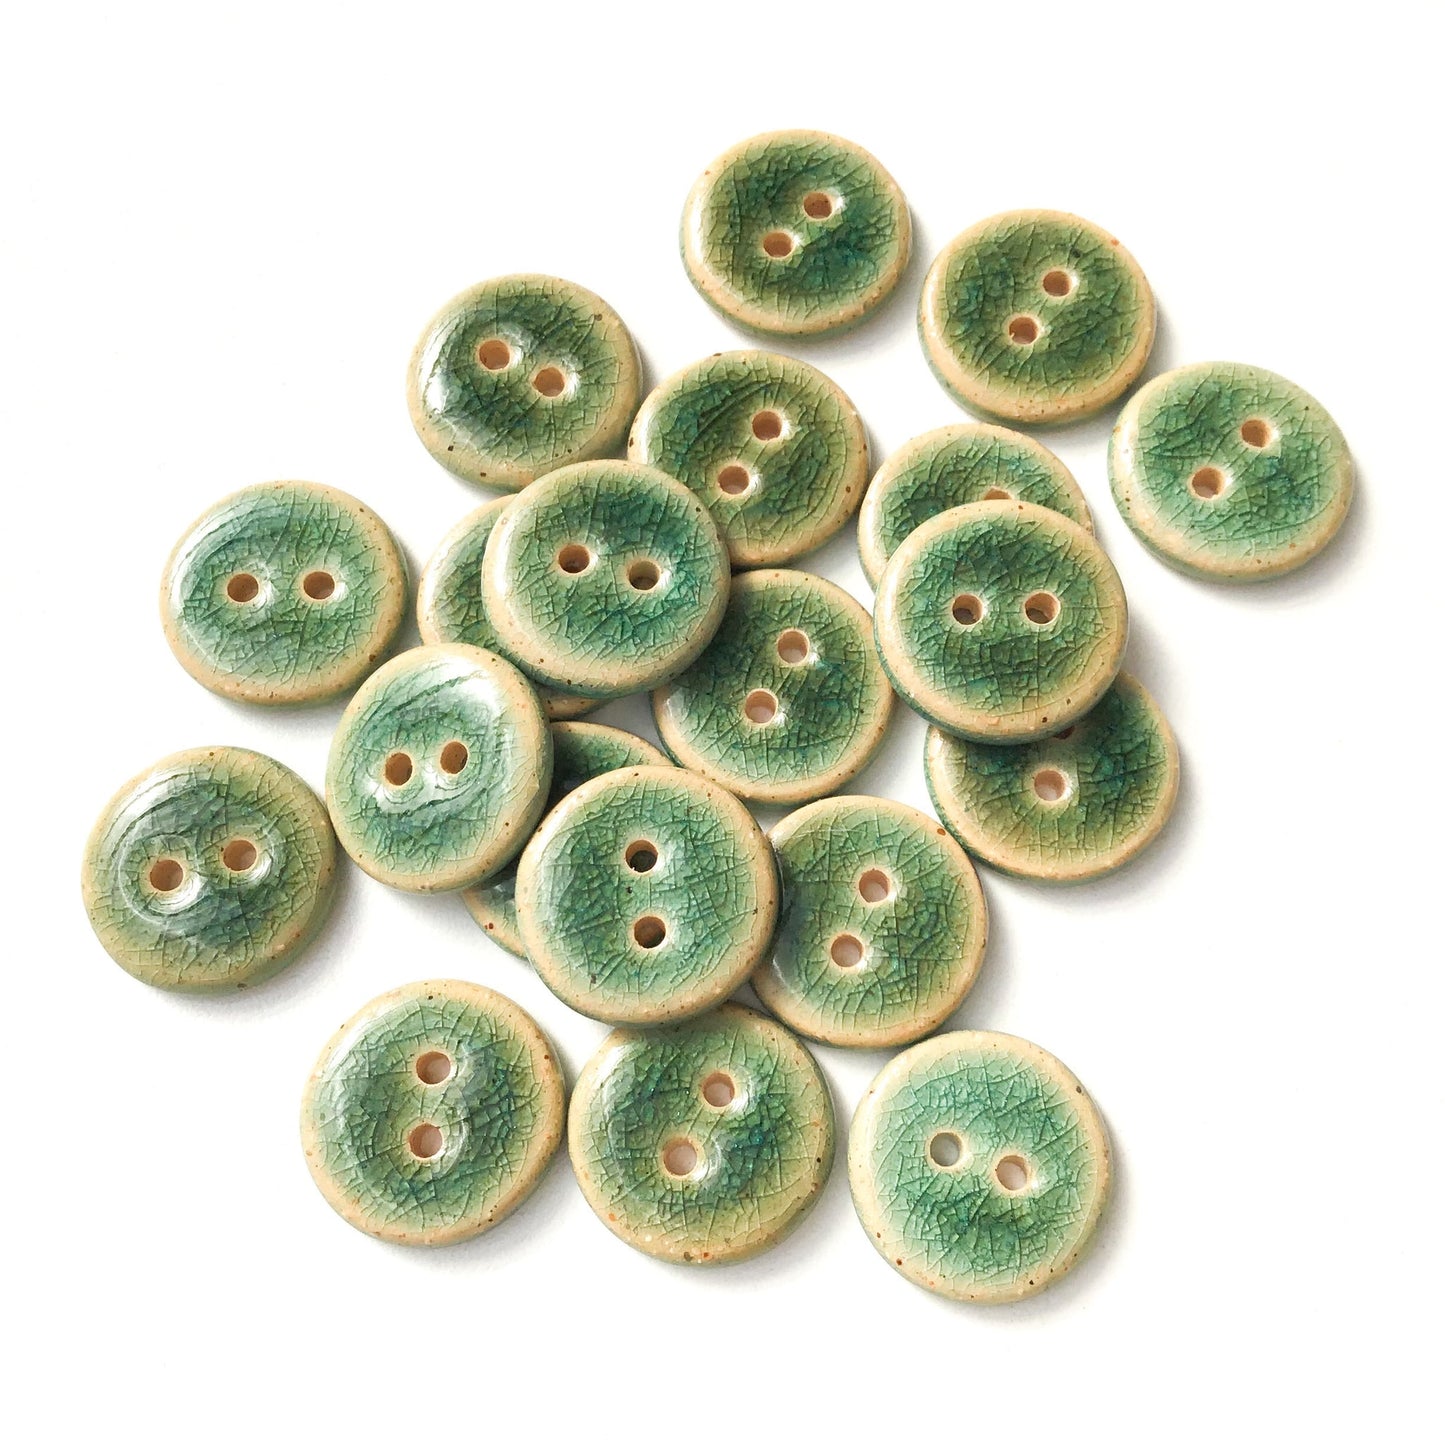 (Wholesale Accounts Only) 3/4" - Blue Green Crackle  on brown clay